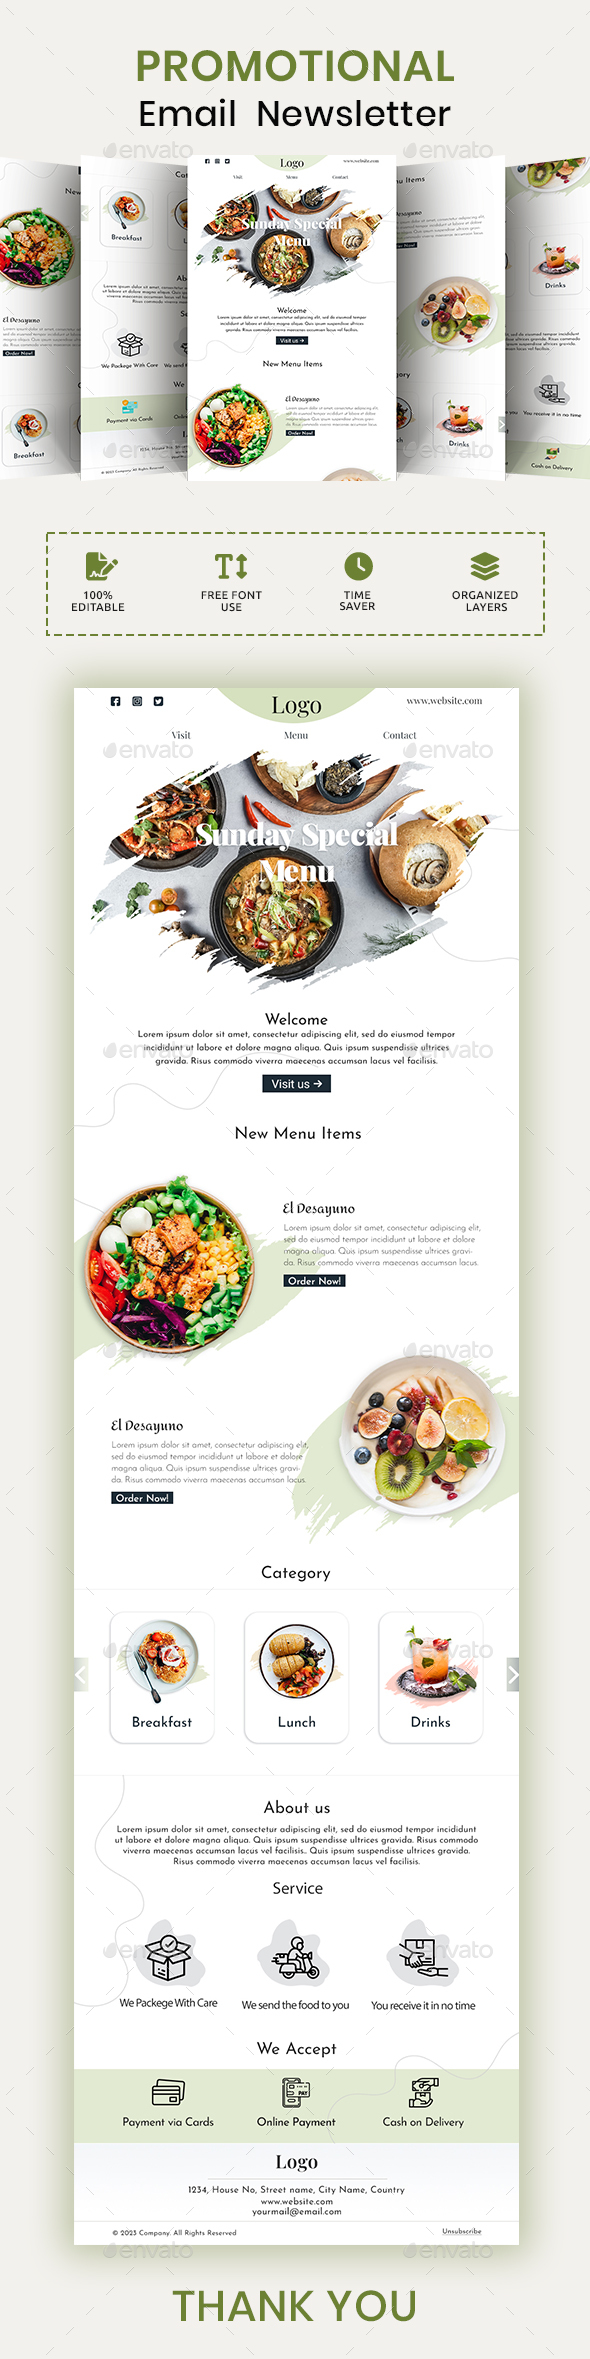 [DOWNLOAD]Restaurant Email Newsletter PSD Template